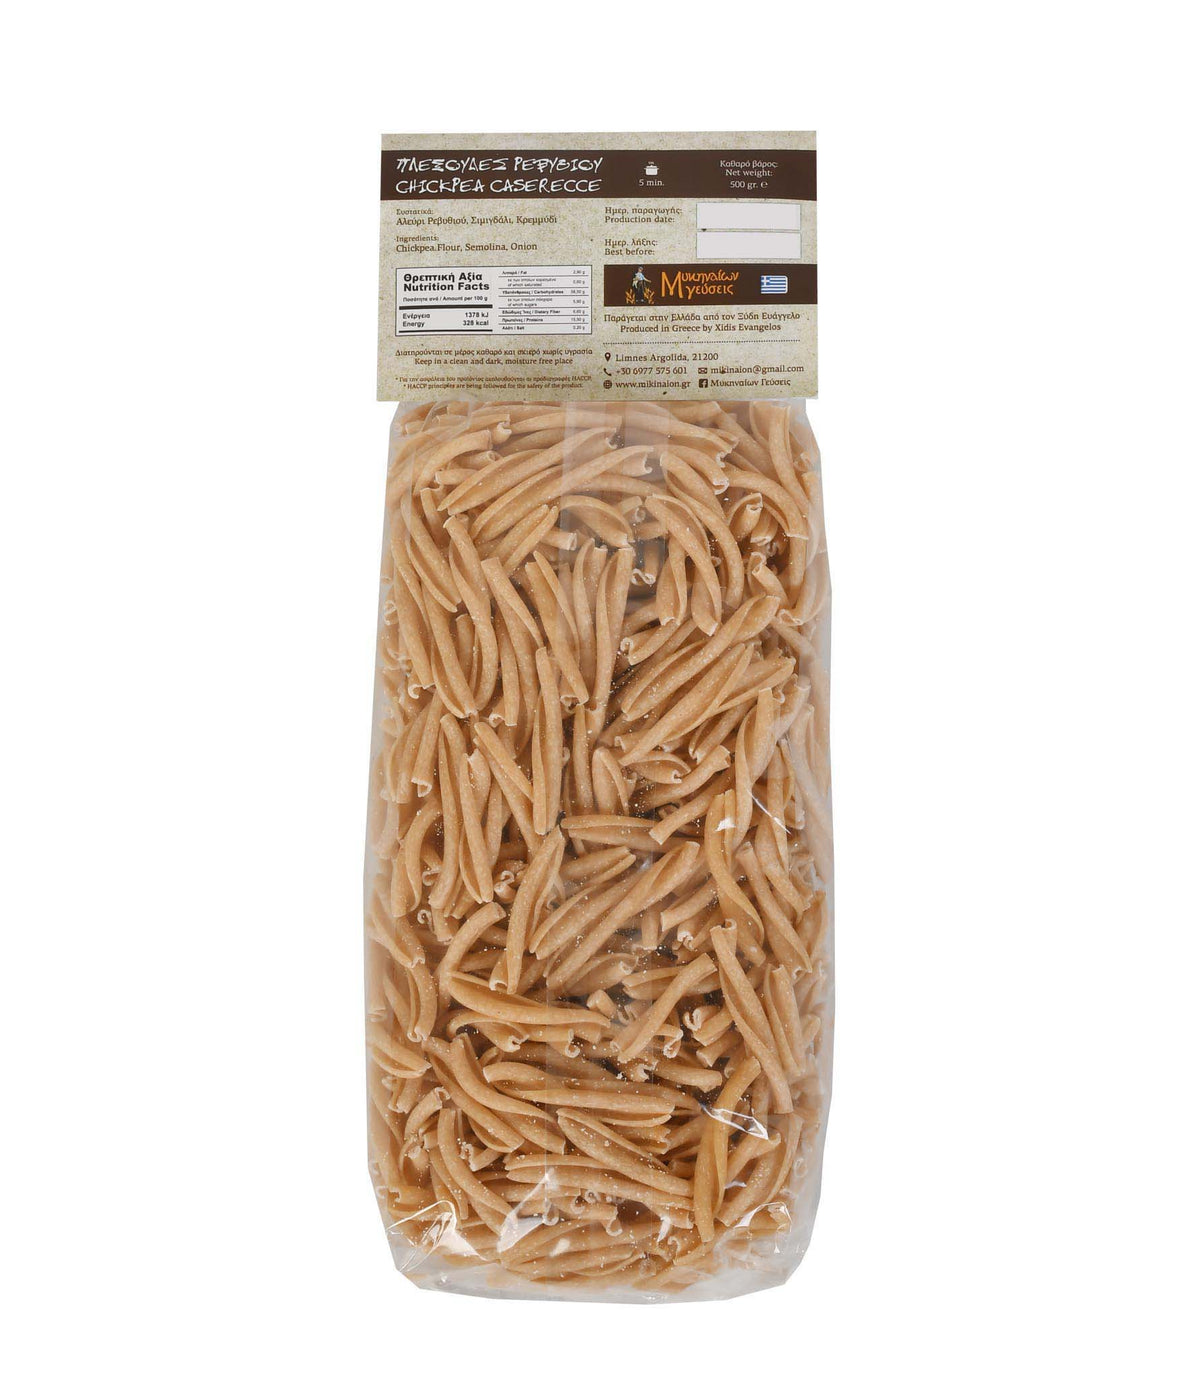 Back of package of Mikinaion Gefsis Caserecce with Chickpea and Onion pasta